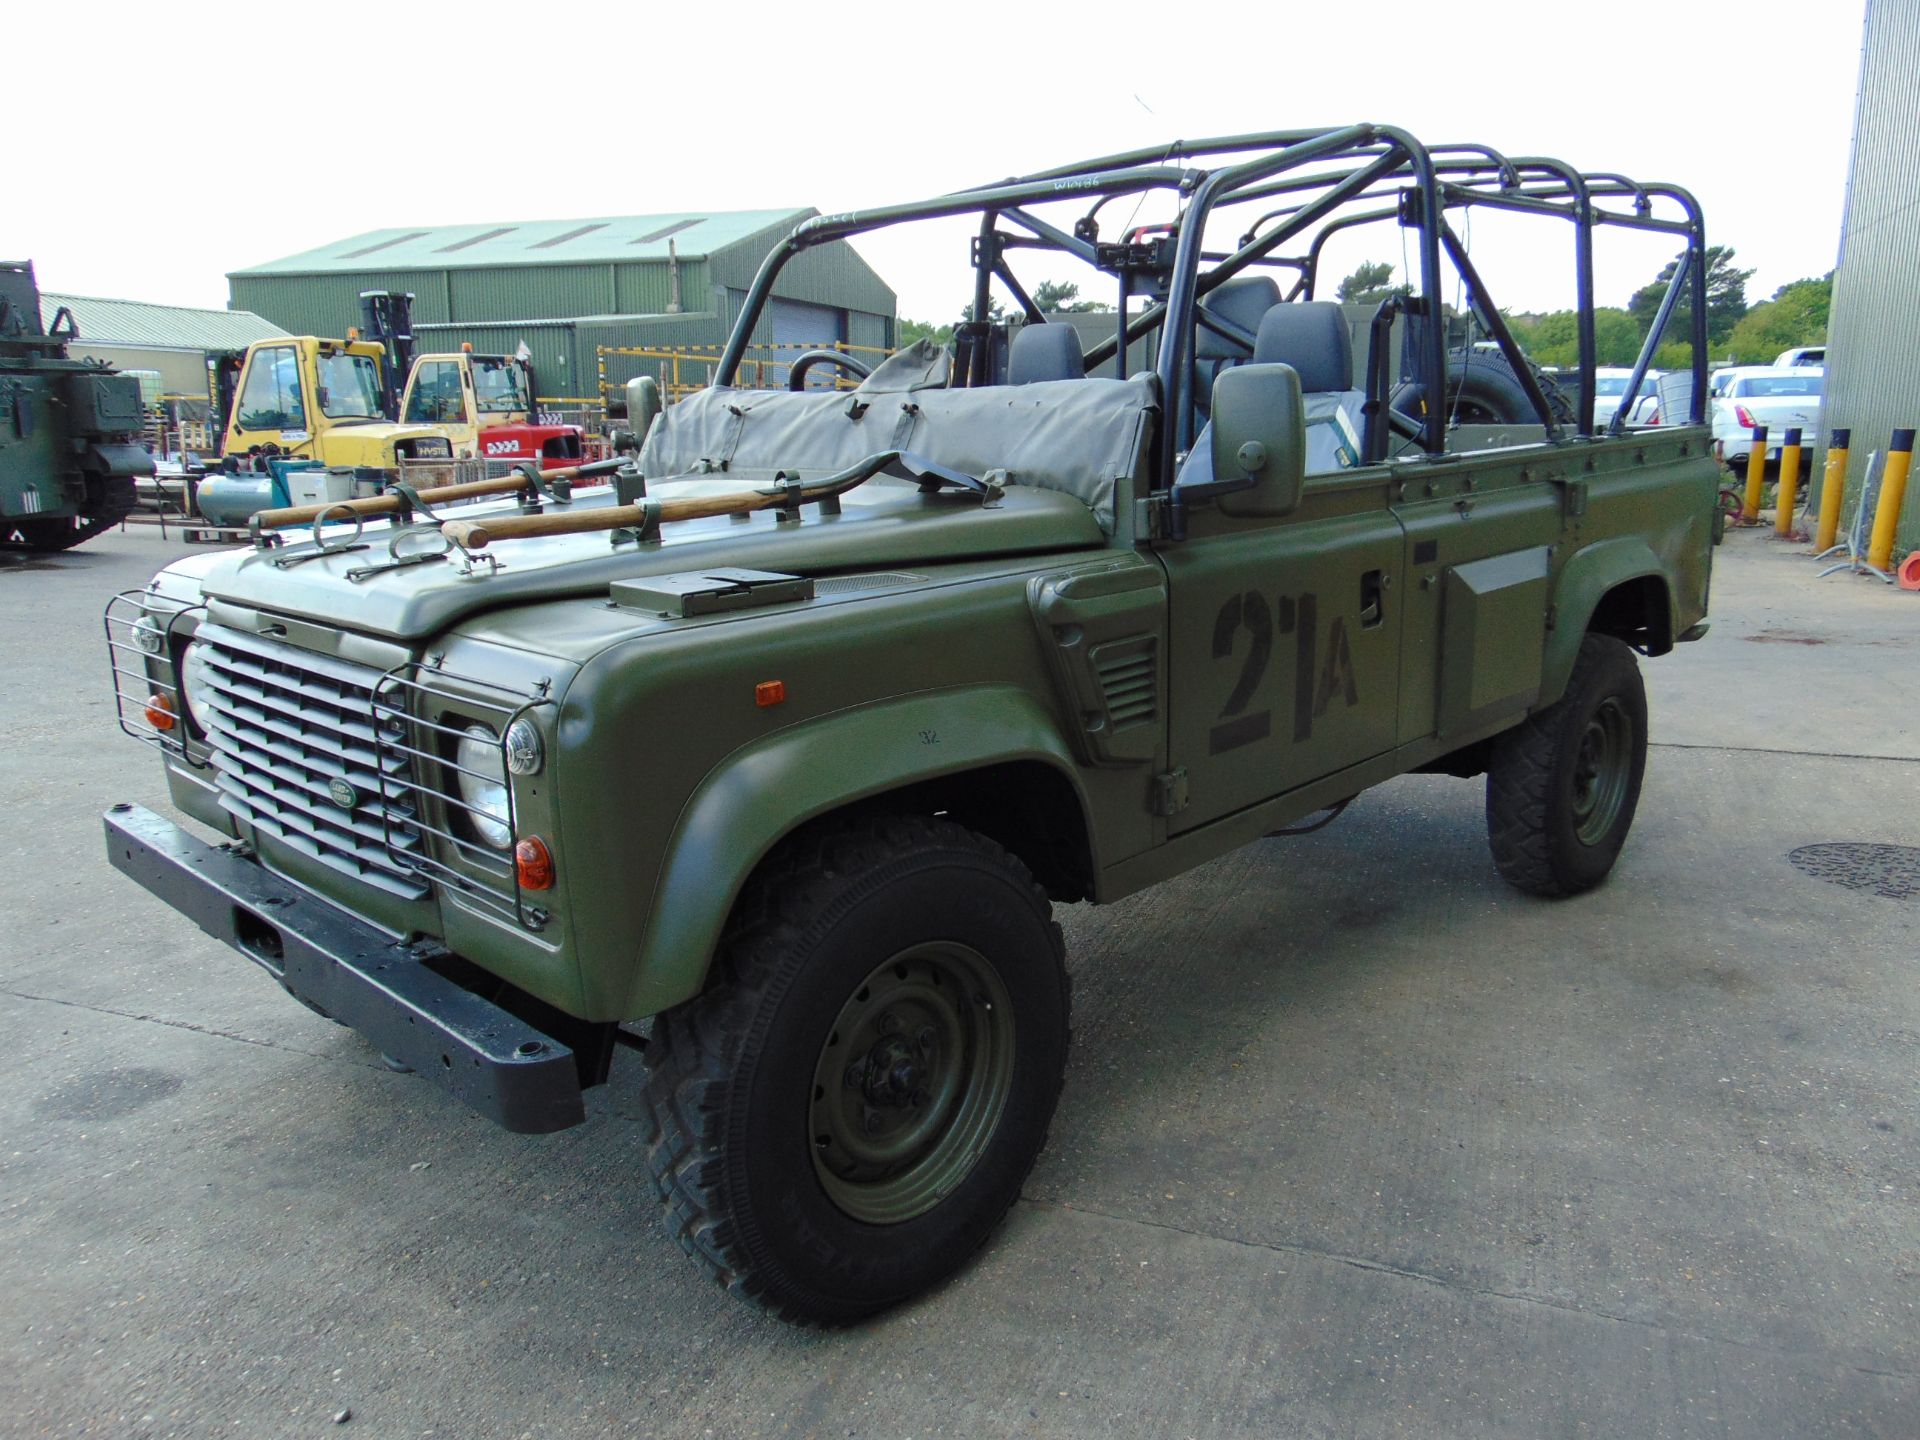 Land Rover Defender Wolf 110 Scout vehicle 300 Tdi - Image 5 of 37